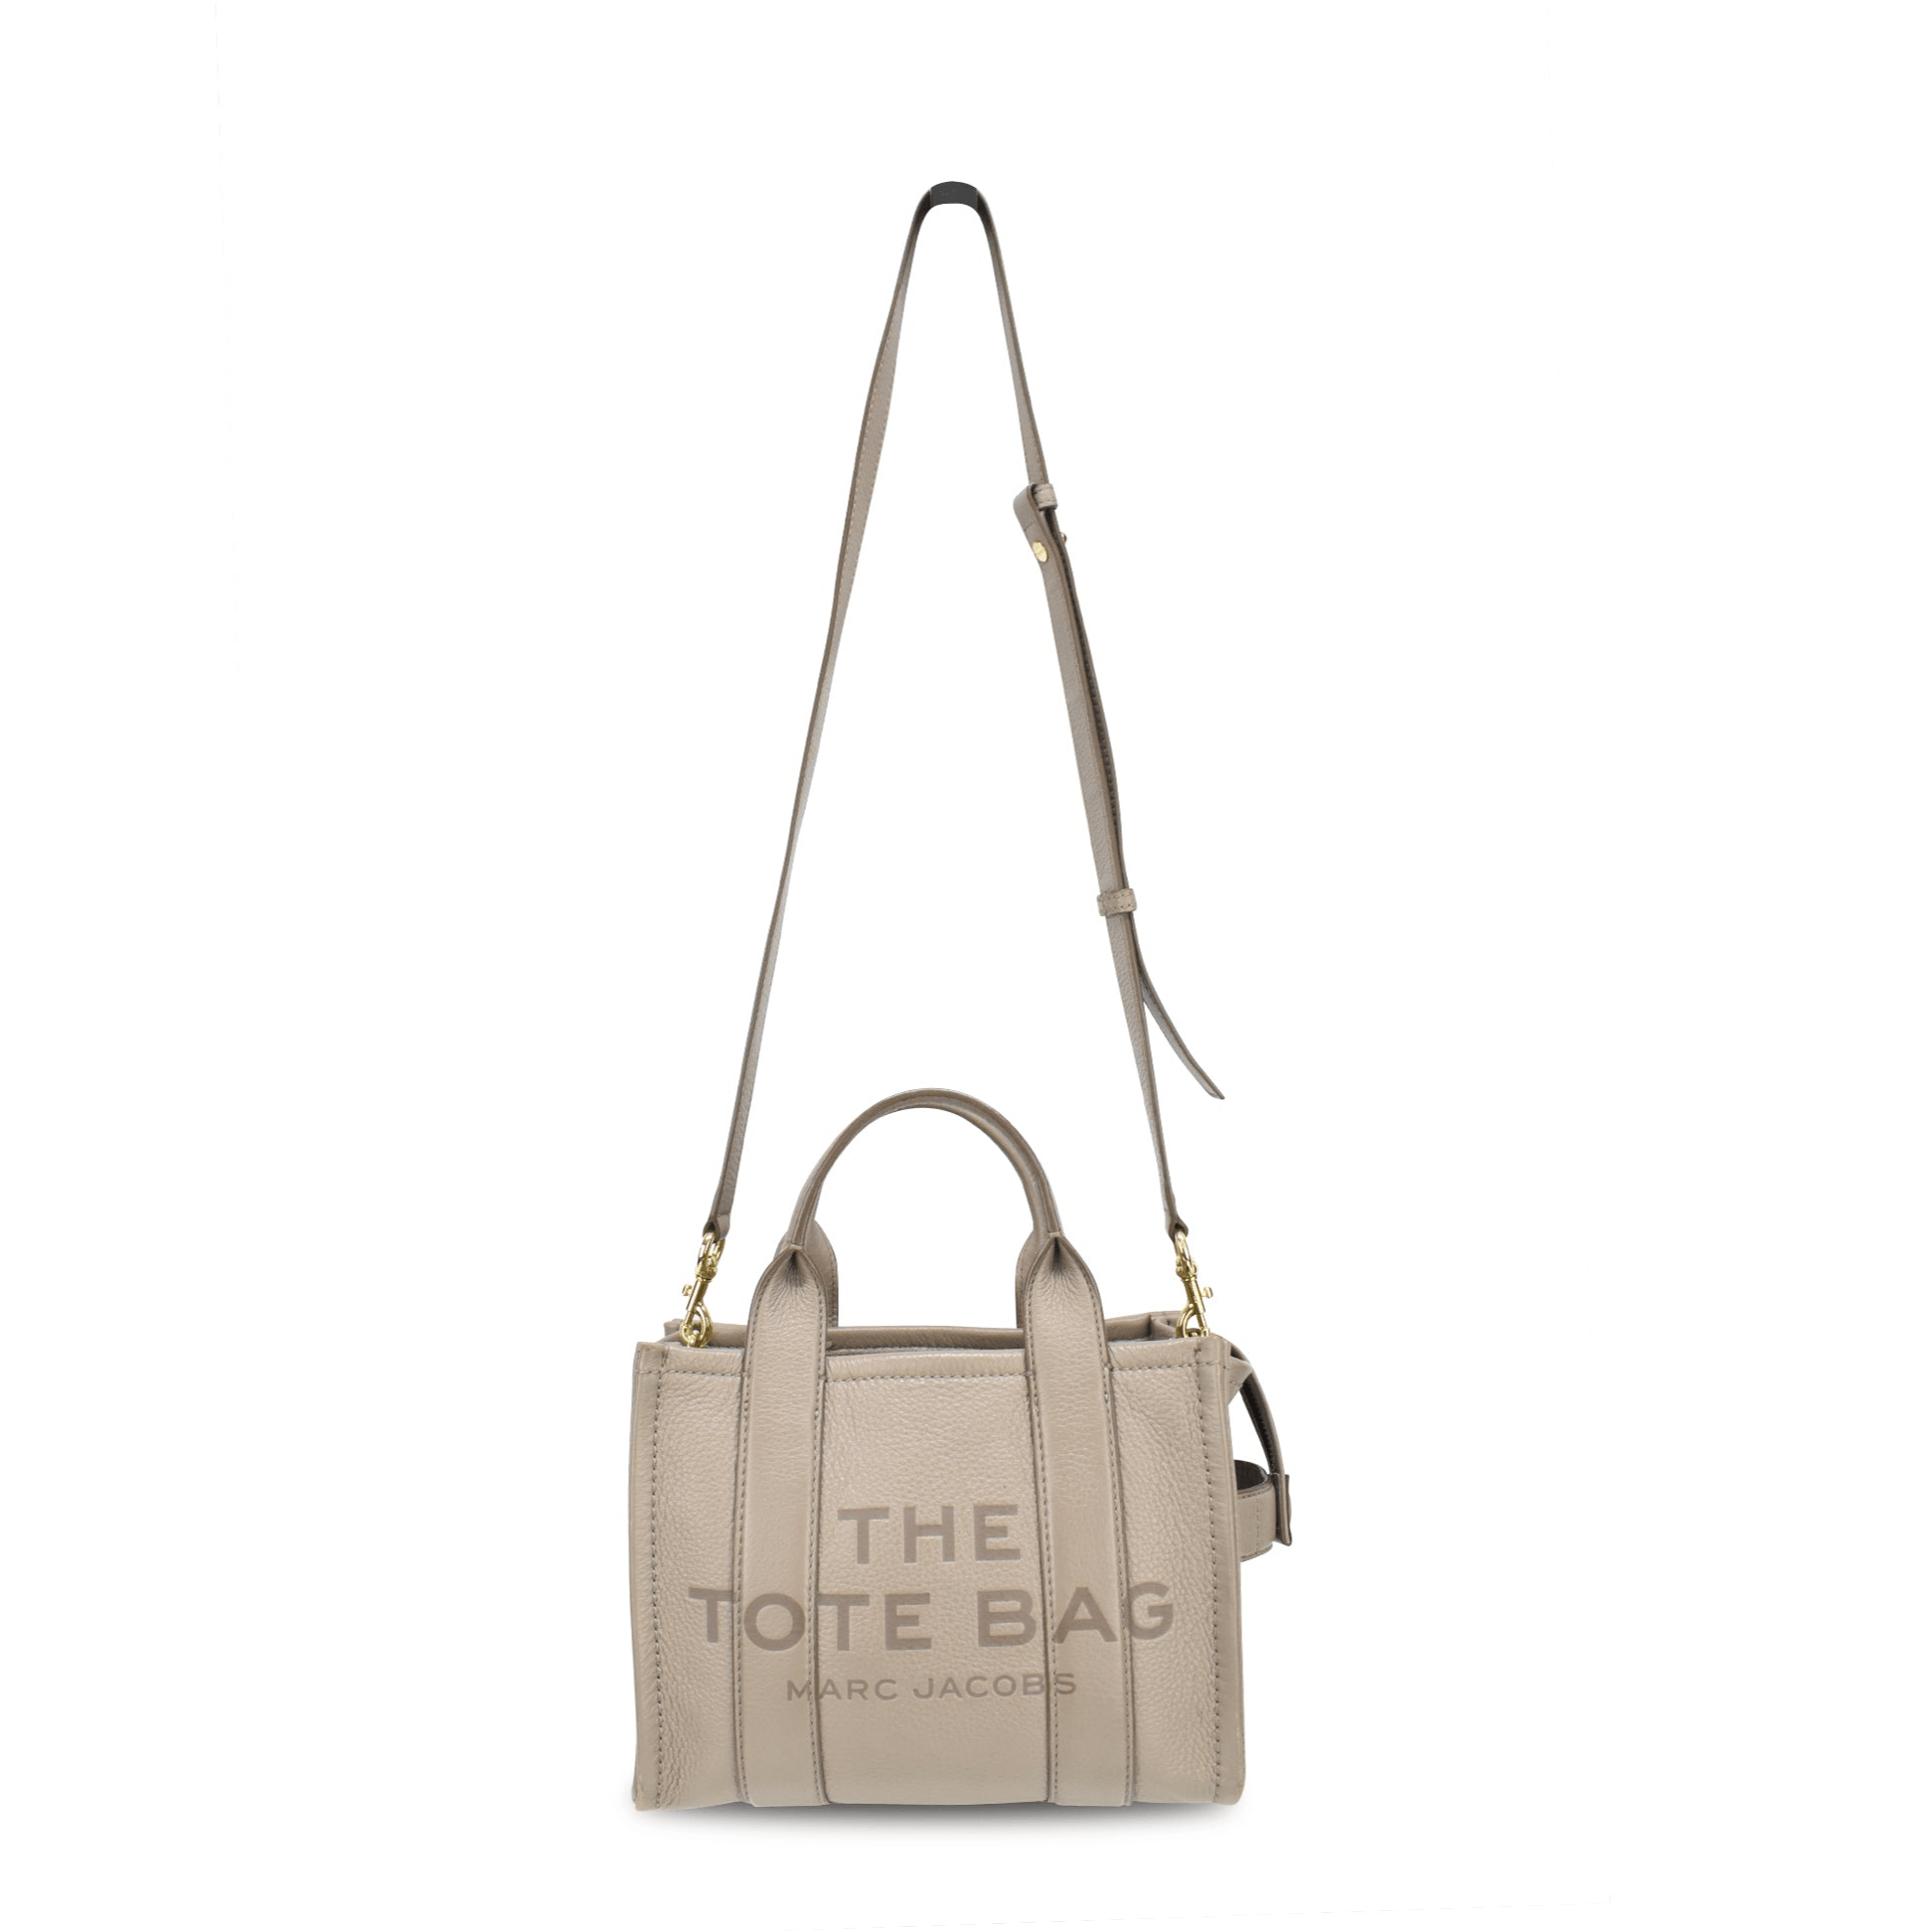 Marc Jacobs 'The Tote Bag' - Fashionably Yours